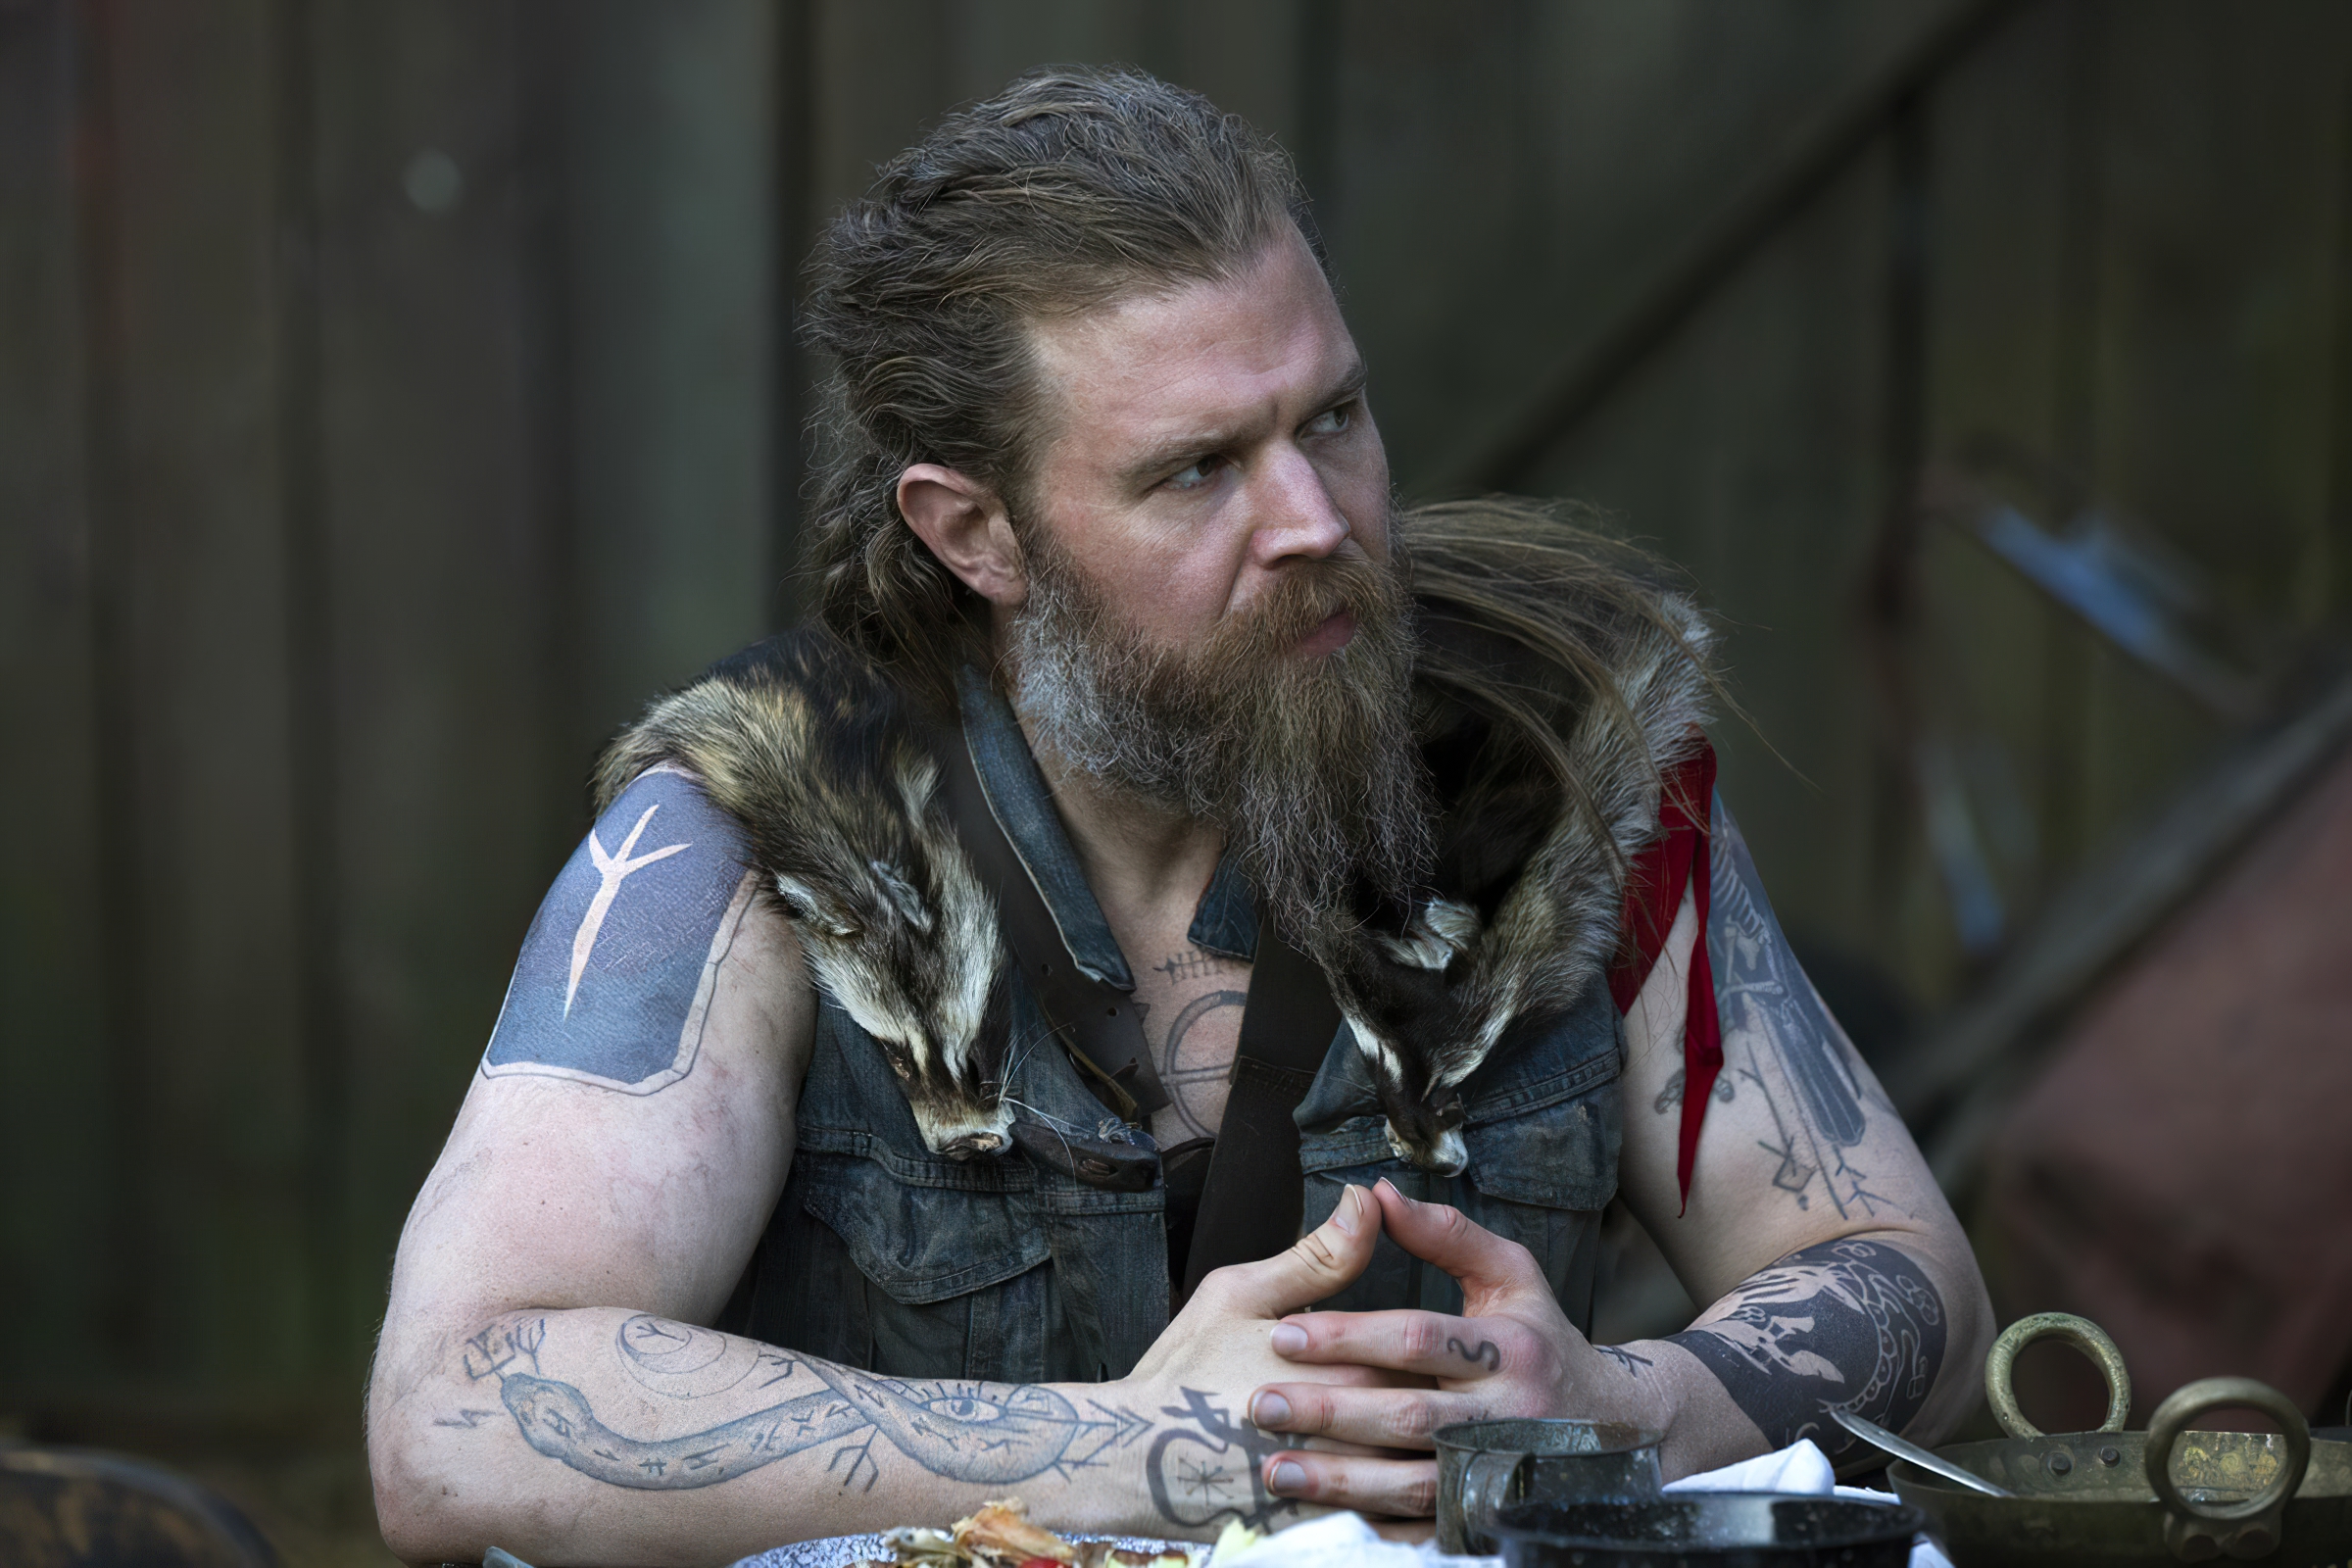 HD wallpaper of a character from Outlander, featuring a bearded man with tattoos wearing a vest with fur accents, contemplating thoughtfully.